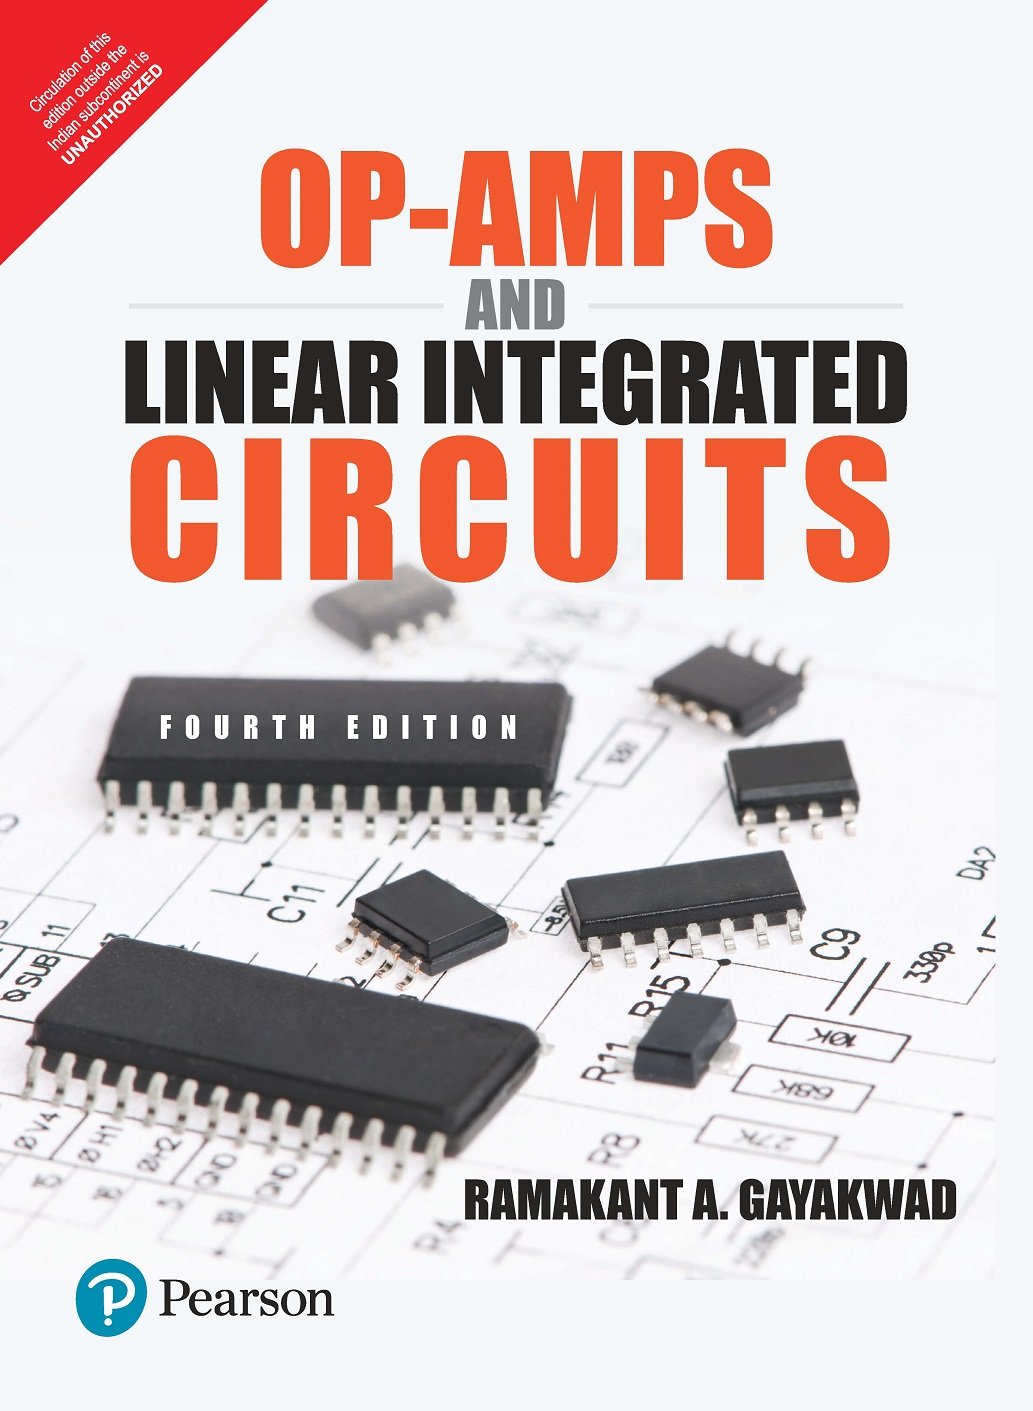 Op amp and linear integrated circuits by ramakant gayakwad ebook free download free